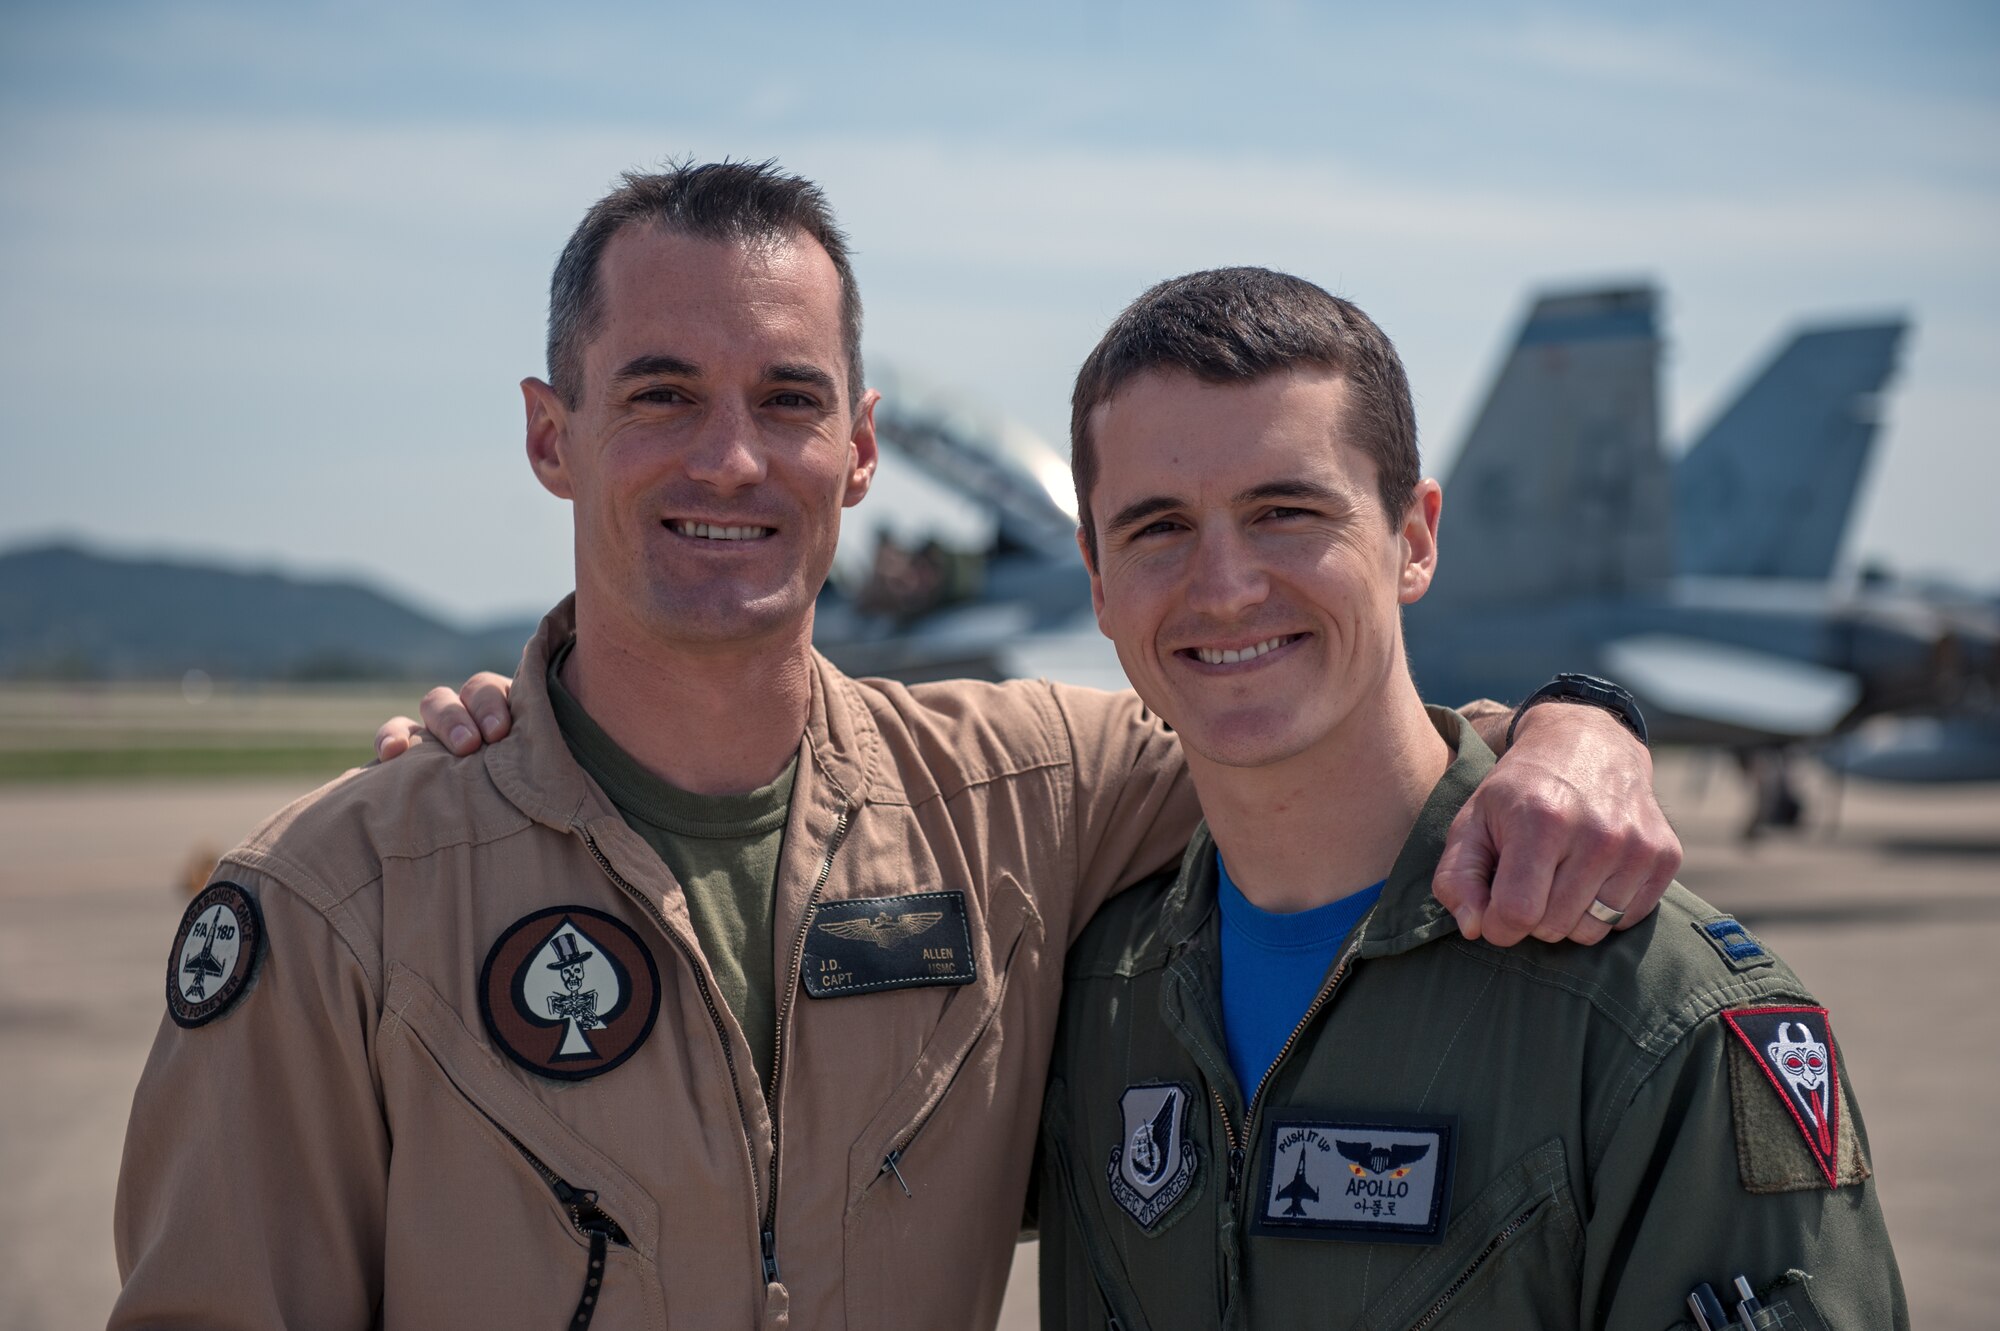 U.S. Marine Corps Capt. Jarrod “Bluto” Allen, Marine All Weather Fighter Attack Squadron 225 F/A-18 Hornet pilot, and U.S. Air Force Capt. Jacob “Apollo” Allen, 35th Fighter Squadron F-16 Fighting Falcon pilot, pose for a photo together during exercise Max Thunder 15-1 at Gwangju Air Base, Republic of Korea, April 17, 2015. (U.S. Air Force photo by Senior Airman Taylor Curry/Released)